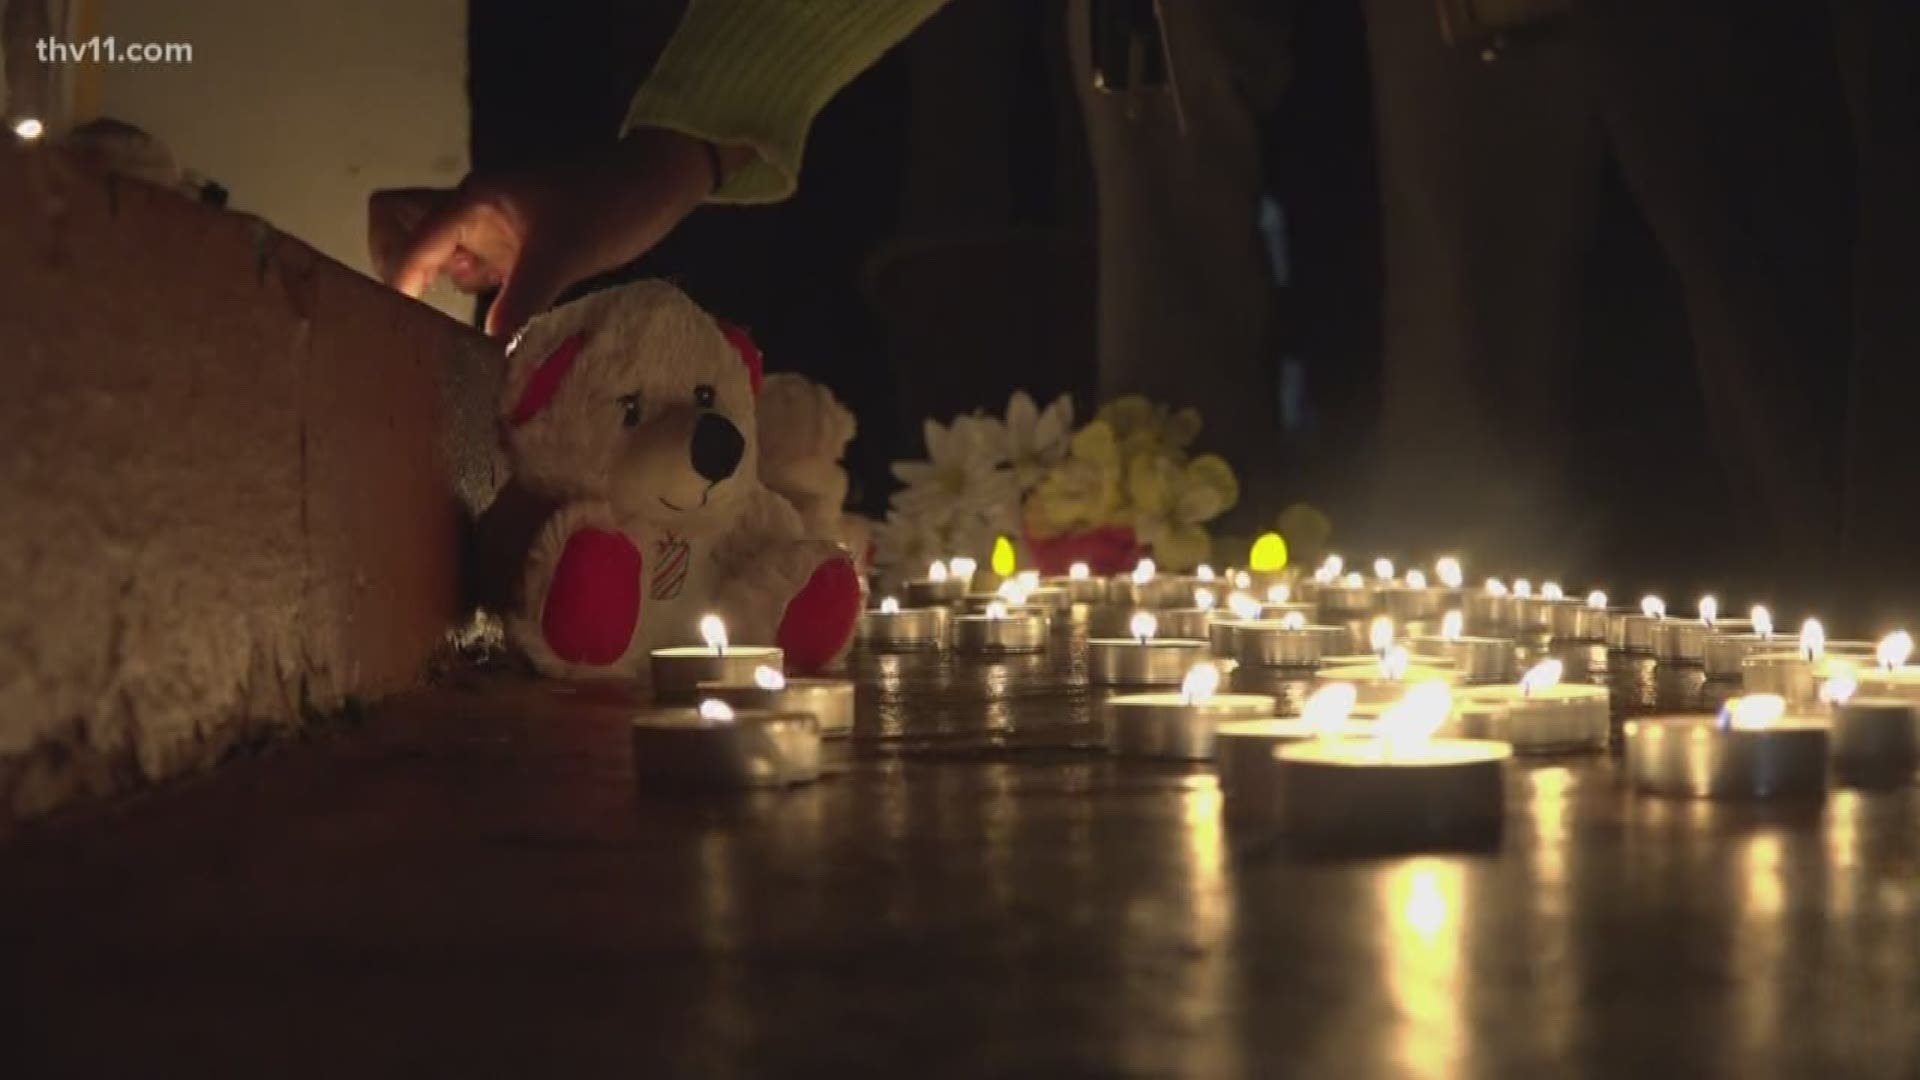 An emotional candlelight vigil was held at UAPB for two students lost in a tragic accident.